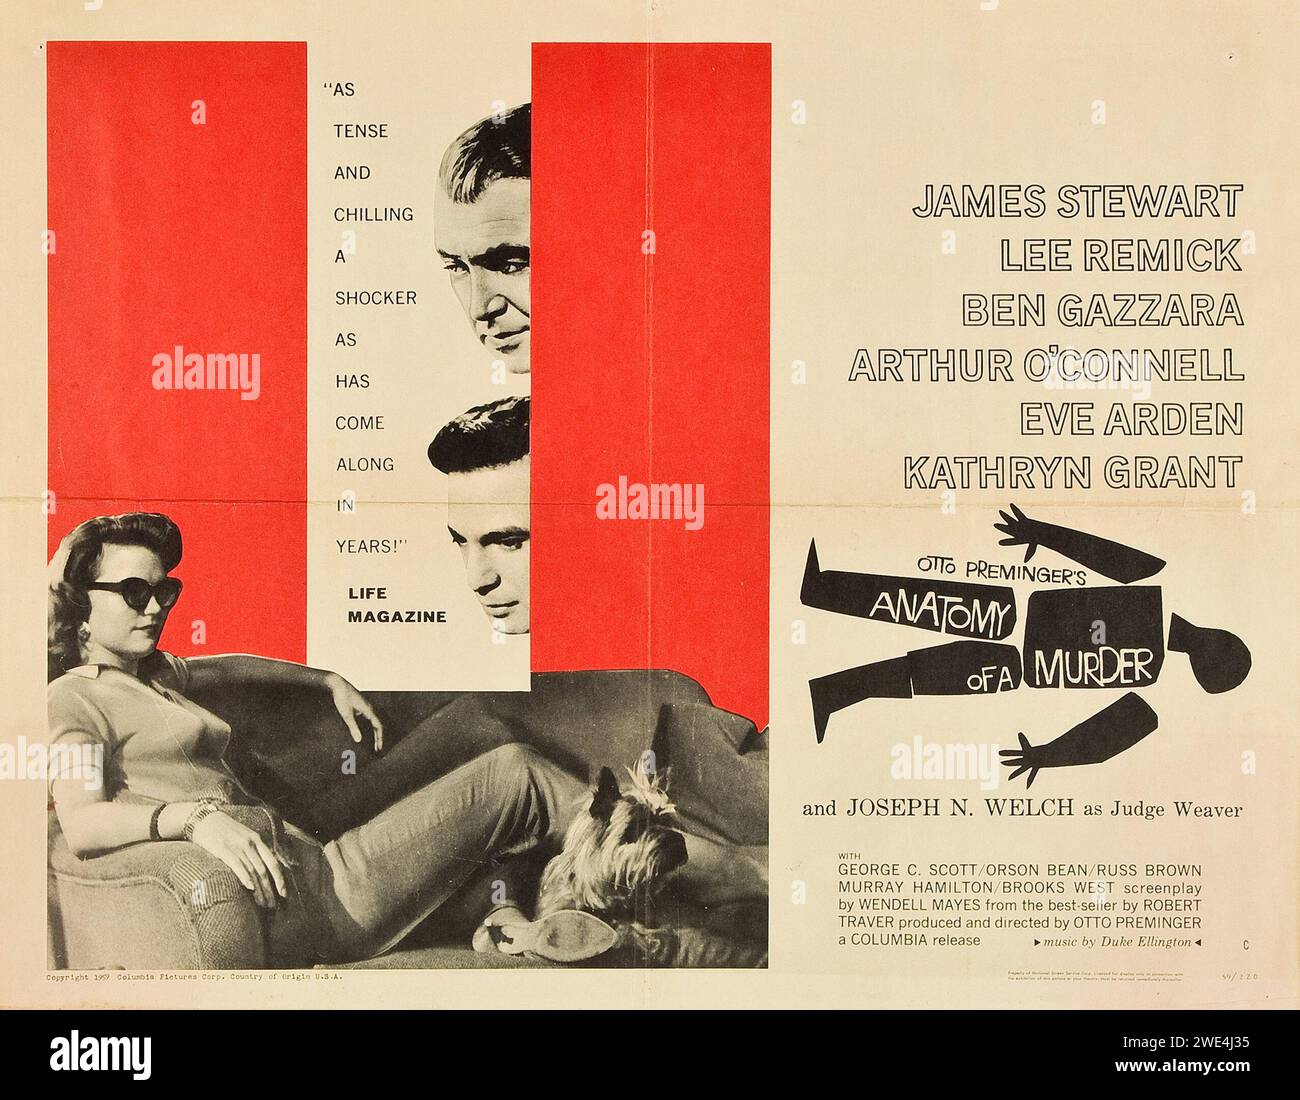 Anatomy of a Murder (Columbia, 1959) vintage film poster - Alfred Hitchcock - James Stewart, Lee Remick - style C Stock Photo